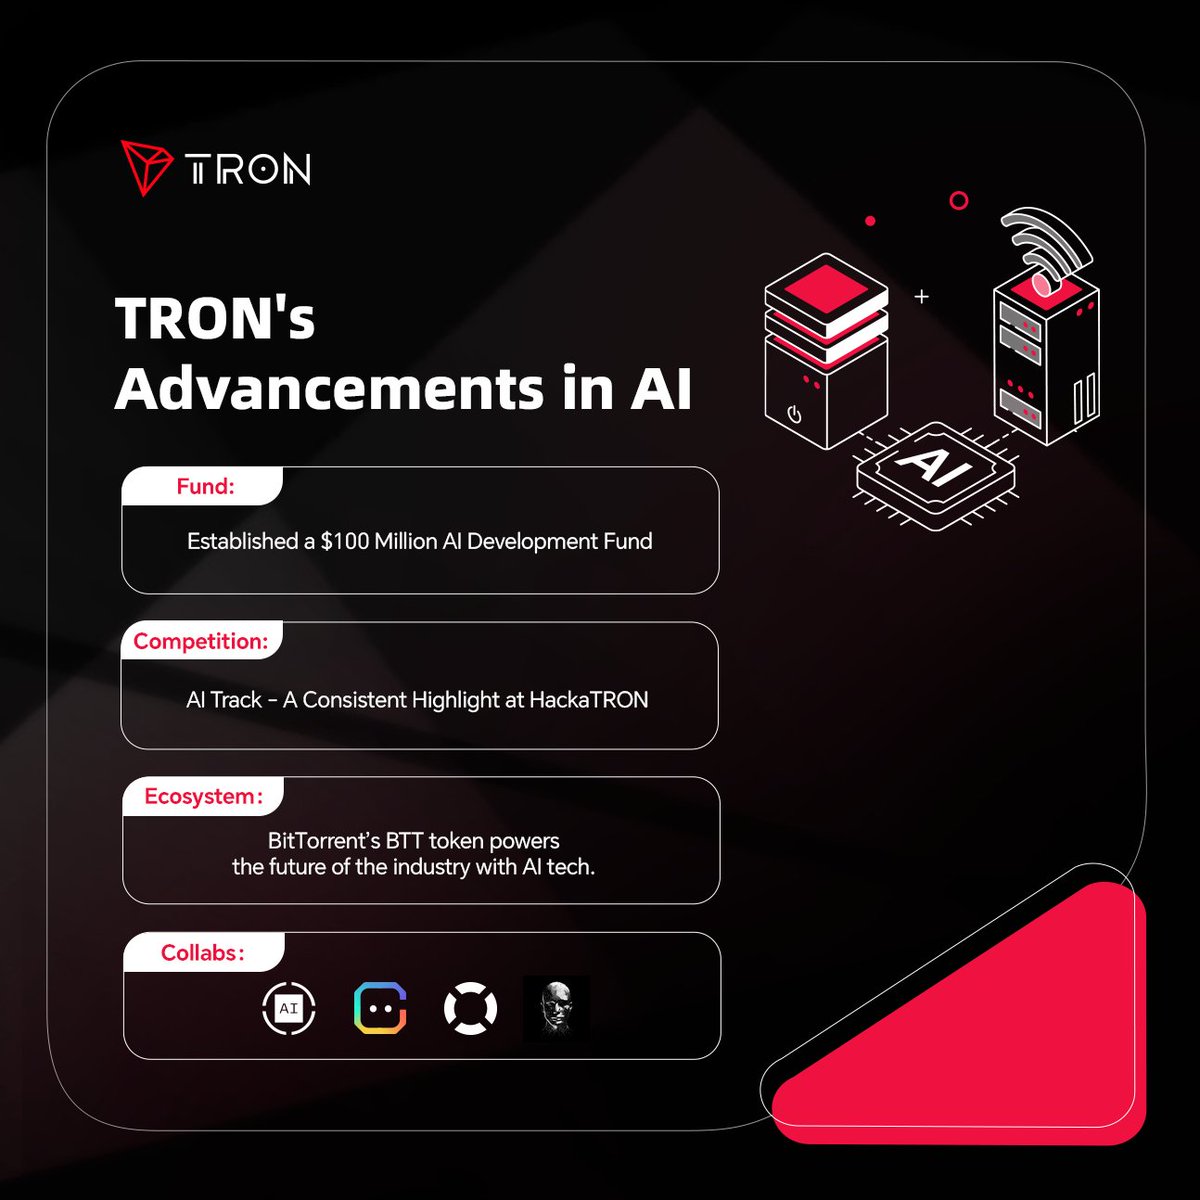 #TRONNetwork believes in the power of community-driven AI innovation. Our tools and resources empower you to build AI solutions on our network. 🌐 #TRONICS, let's shape the future of AI together. 💪